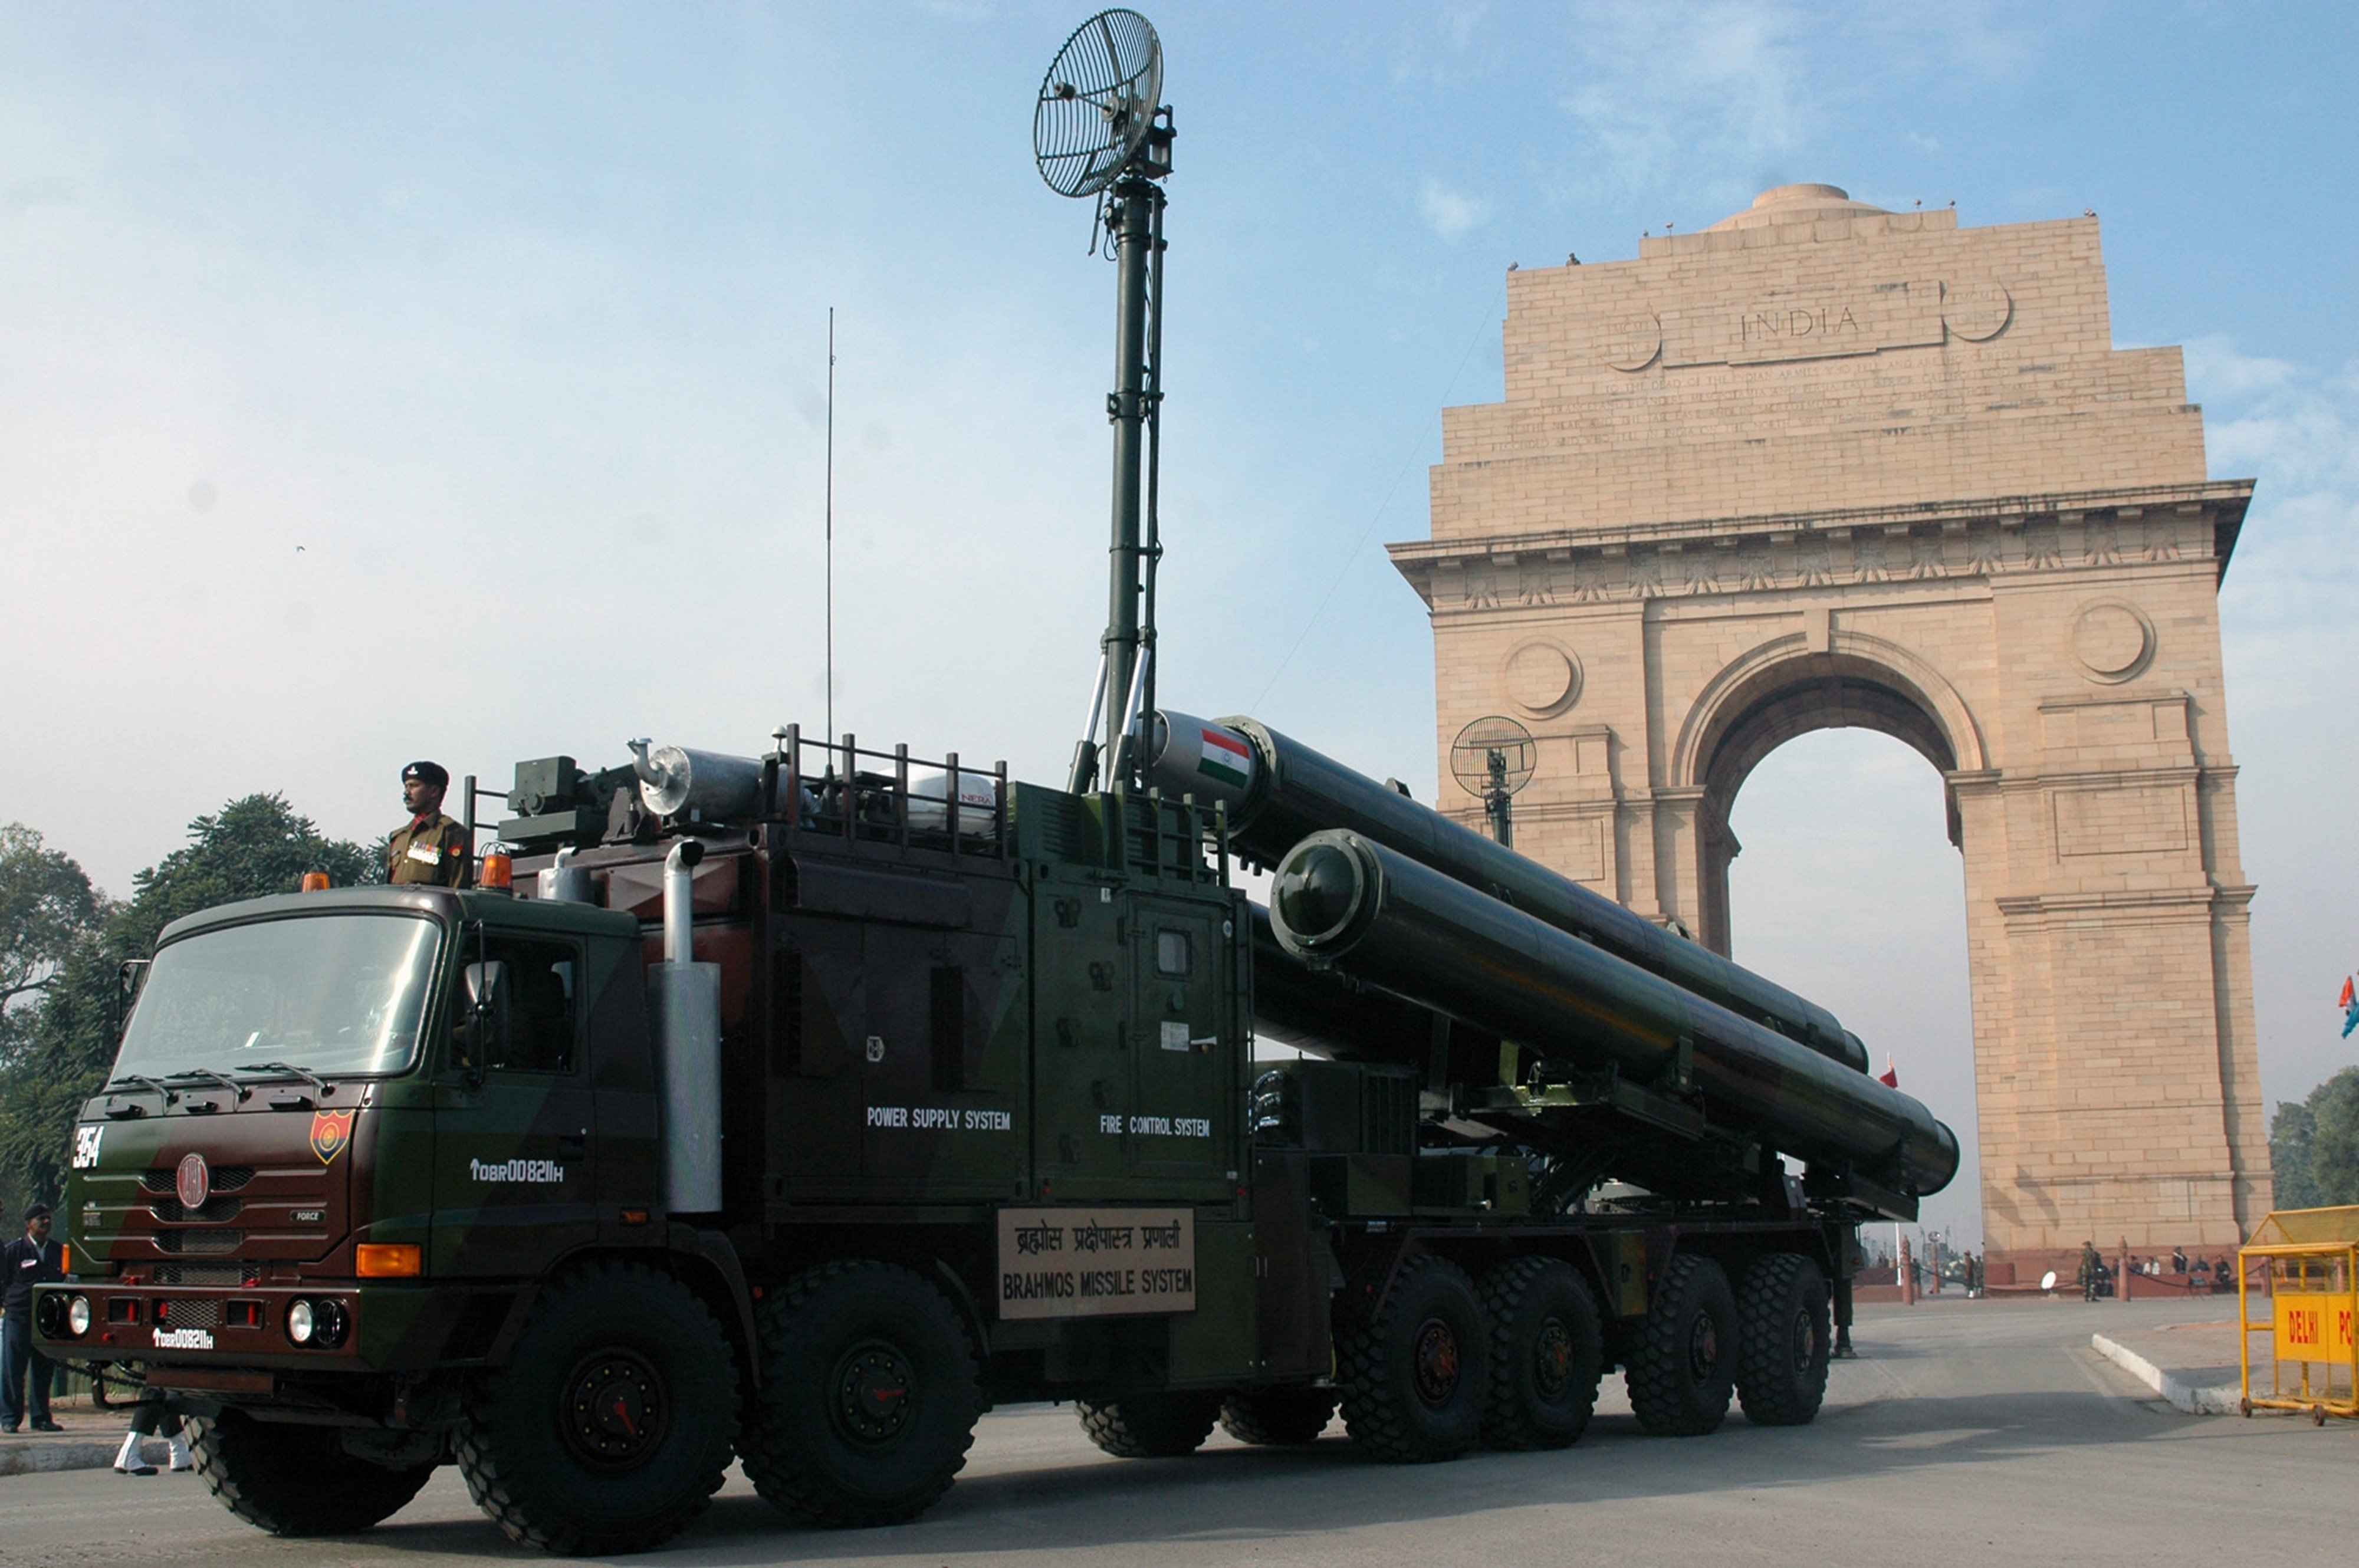 d 7566l, Missile, Wepons, Truck, Vehicle, India Wallpaper